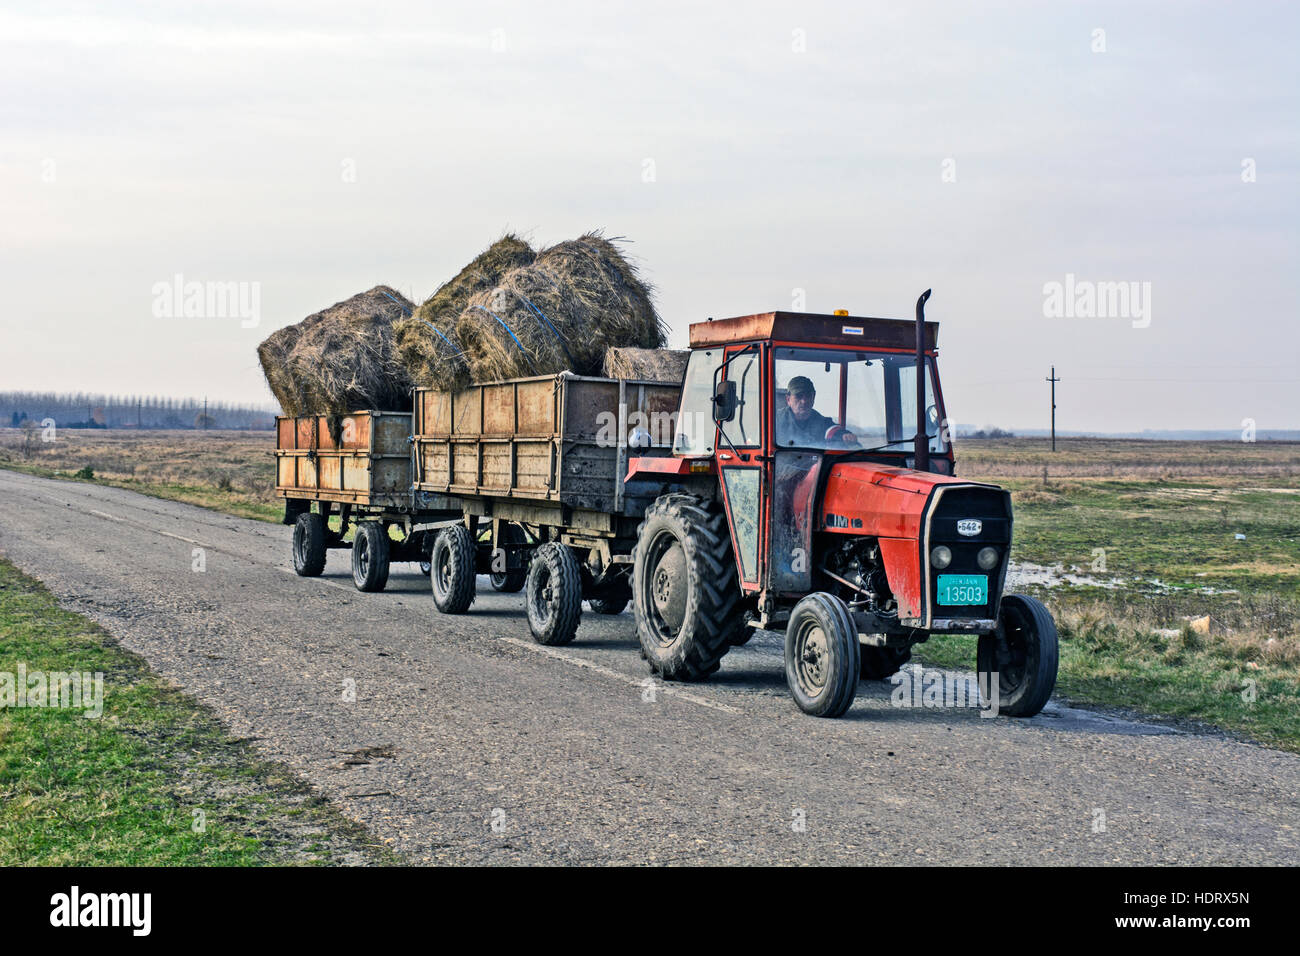 Zrenjanin, Serbia, November 16, 2016. Tractor with two trailers transporting hay. Stock Photo